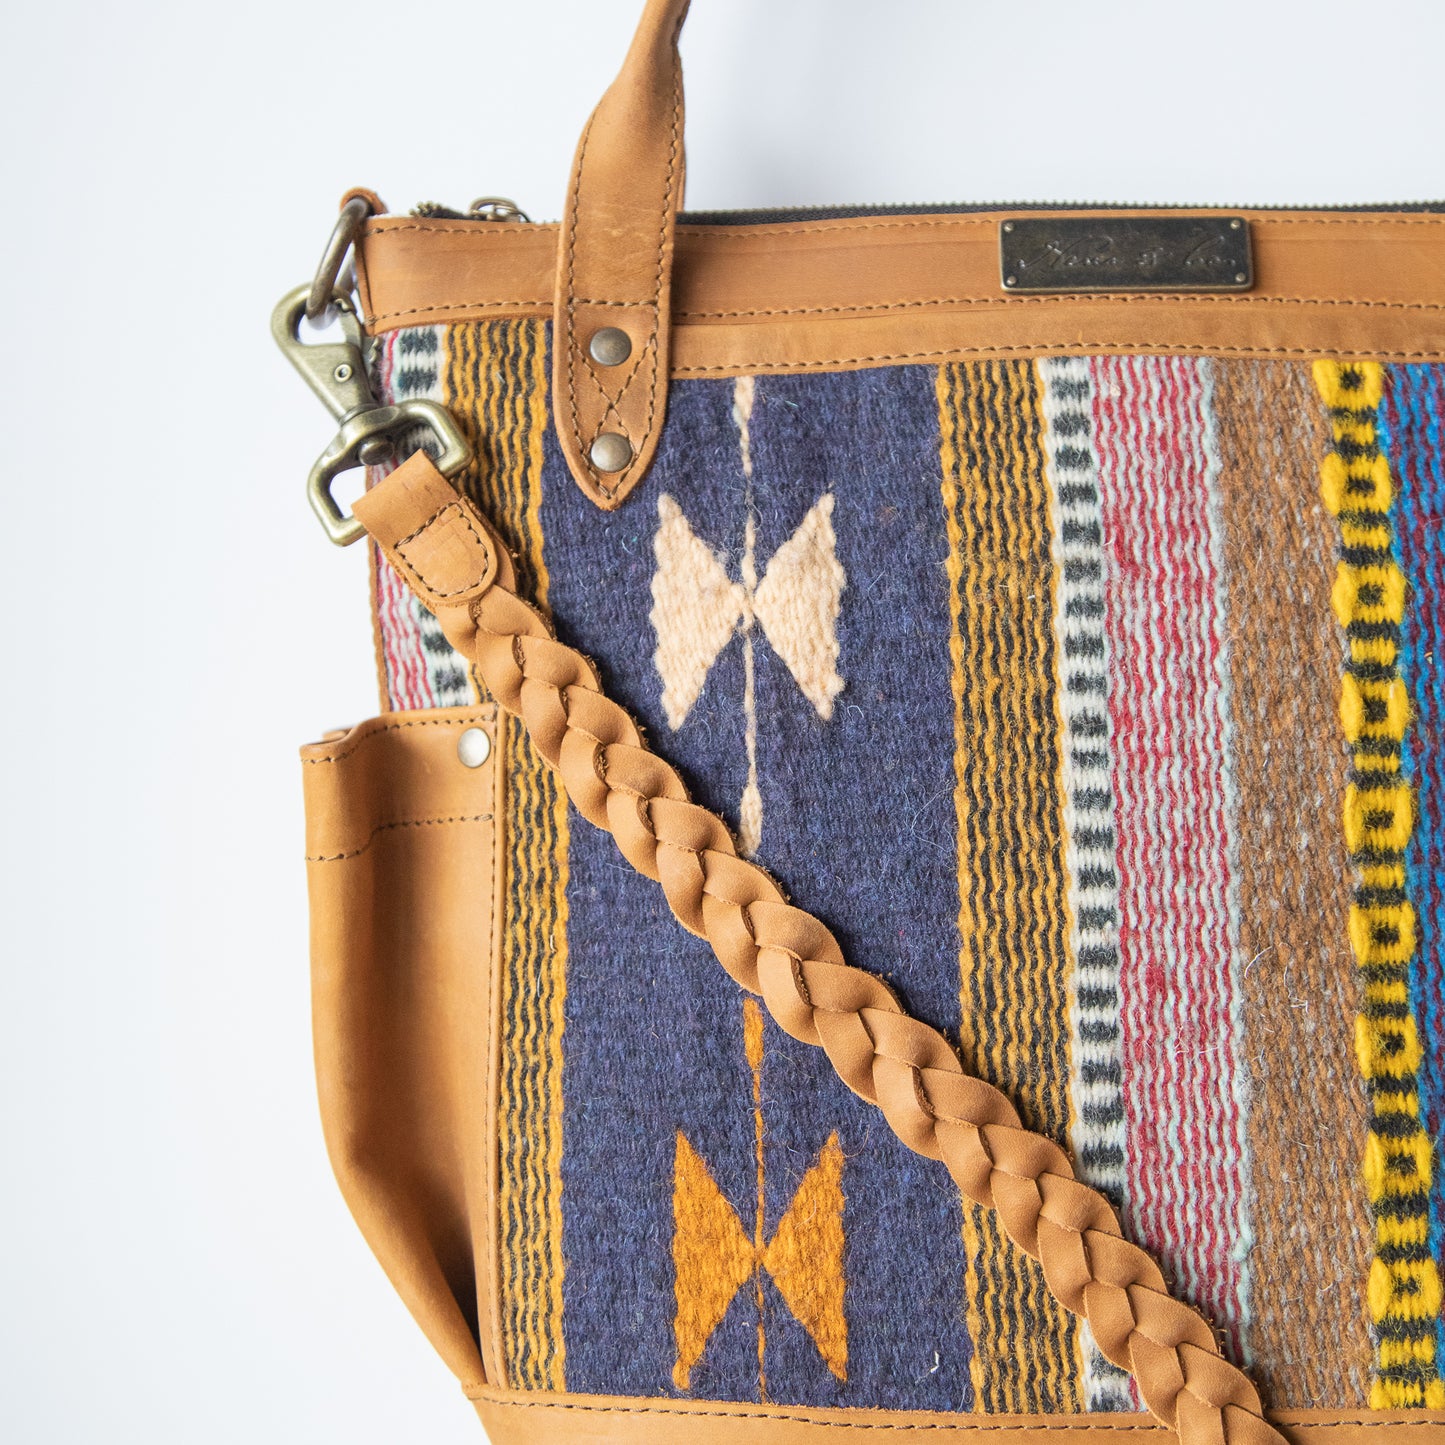 BRAIDED SHOULDER STRAP - MEXICO COLLECTION - TOBACCO LEATHER